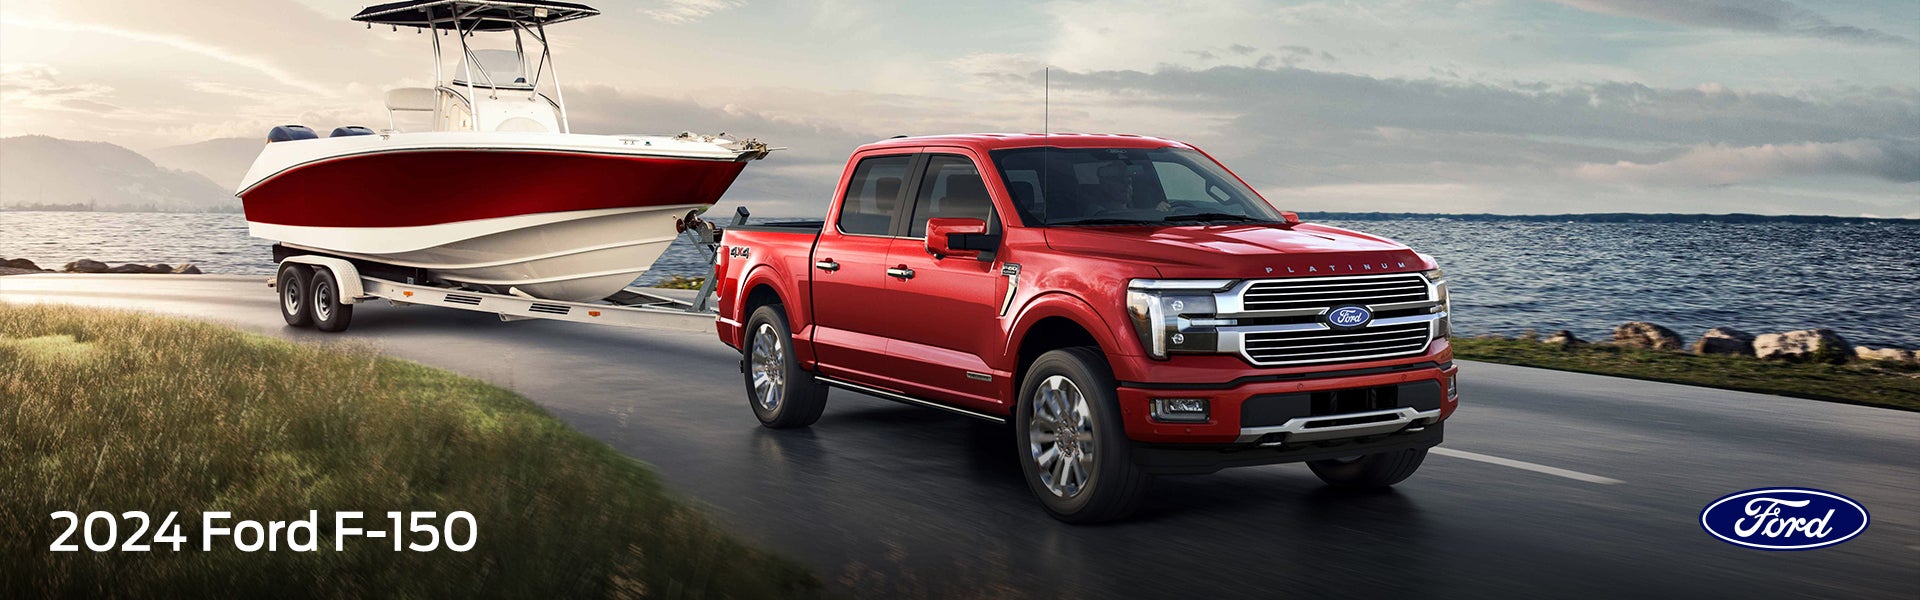 All New Ford F-150